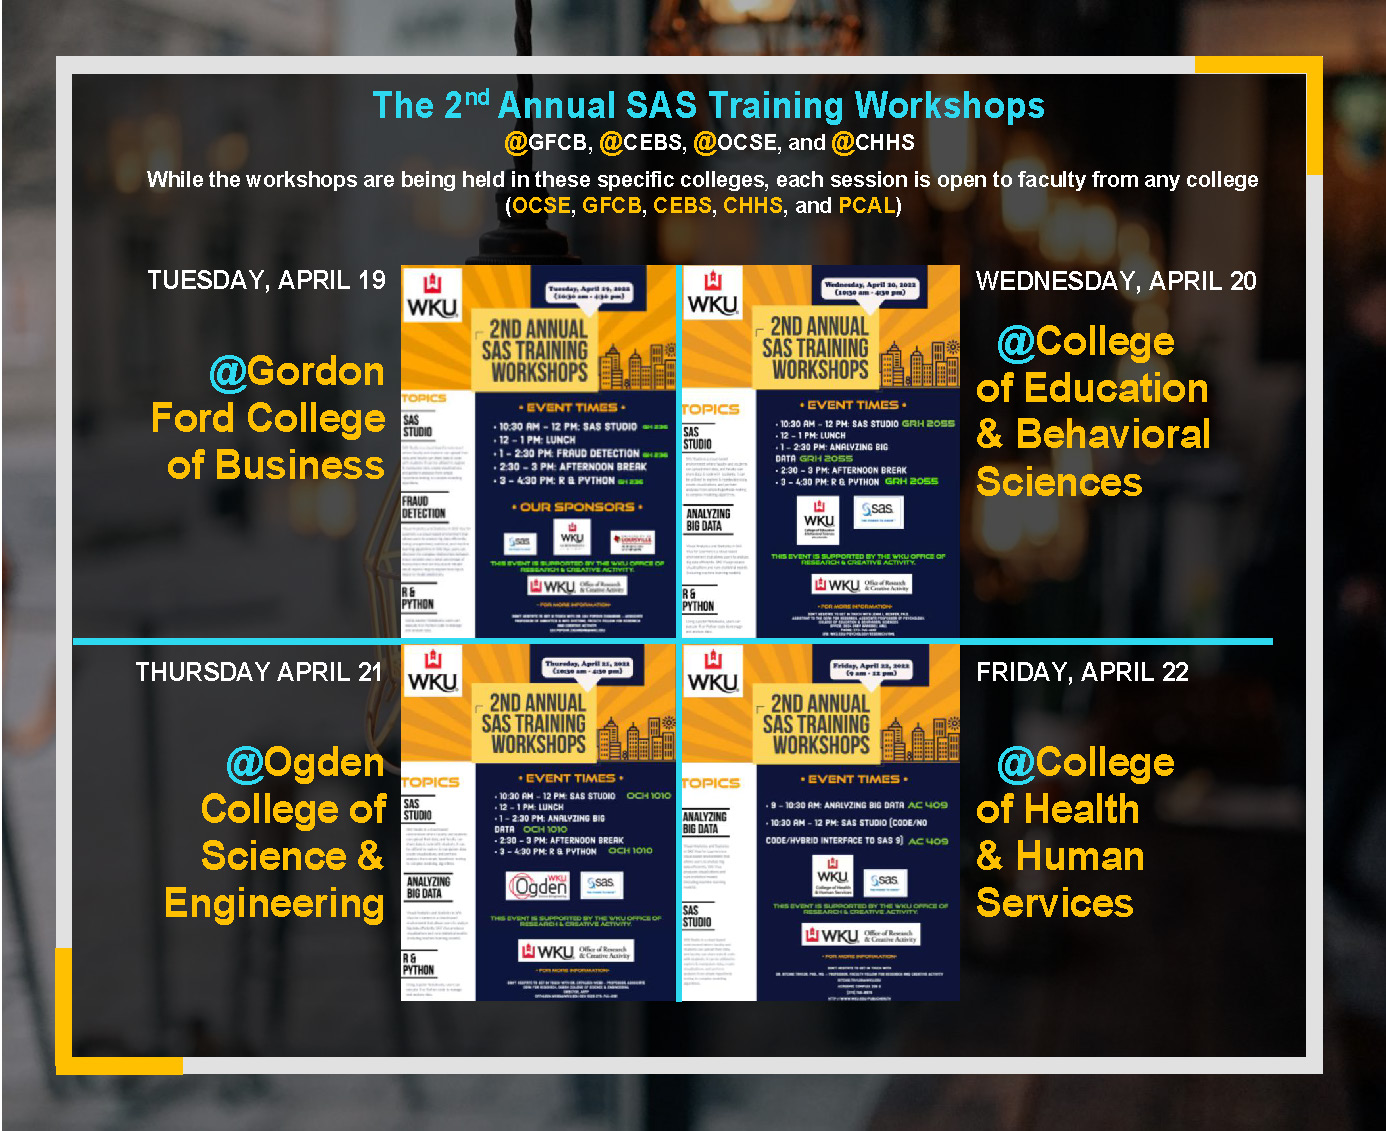 The 2nd Annual SAS Training Workshops  @GFCB, @CEBS, @OCSE, and @CHHS While the workshops are being held in these specific colleges, each session is open to faculty from any college  (OCSE, GFCB, CEBS, CHHS, and PCAL)